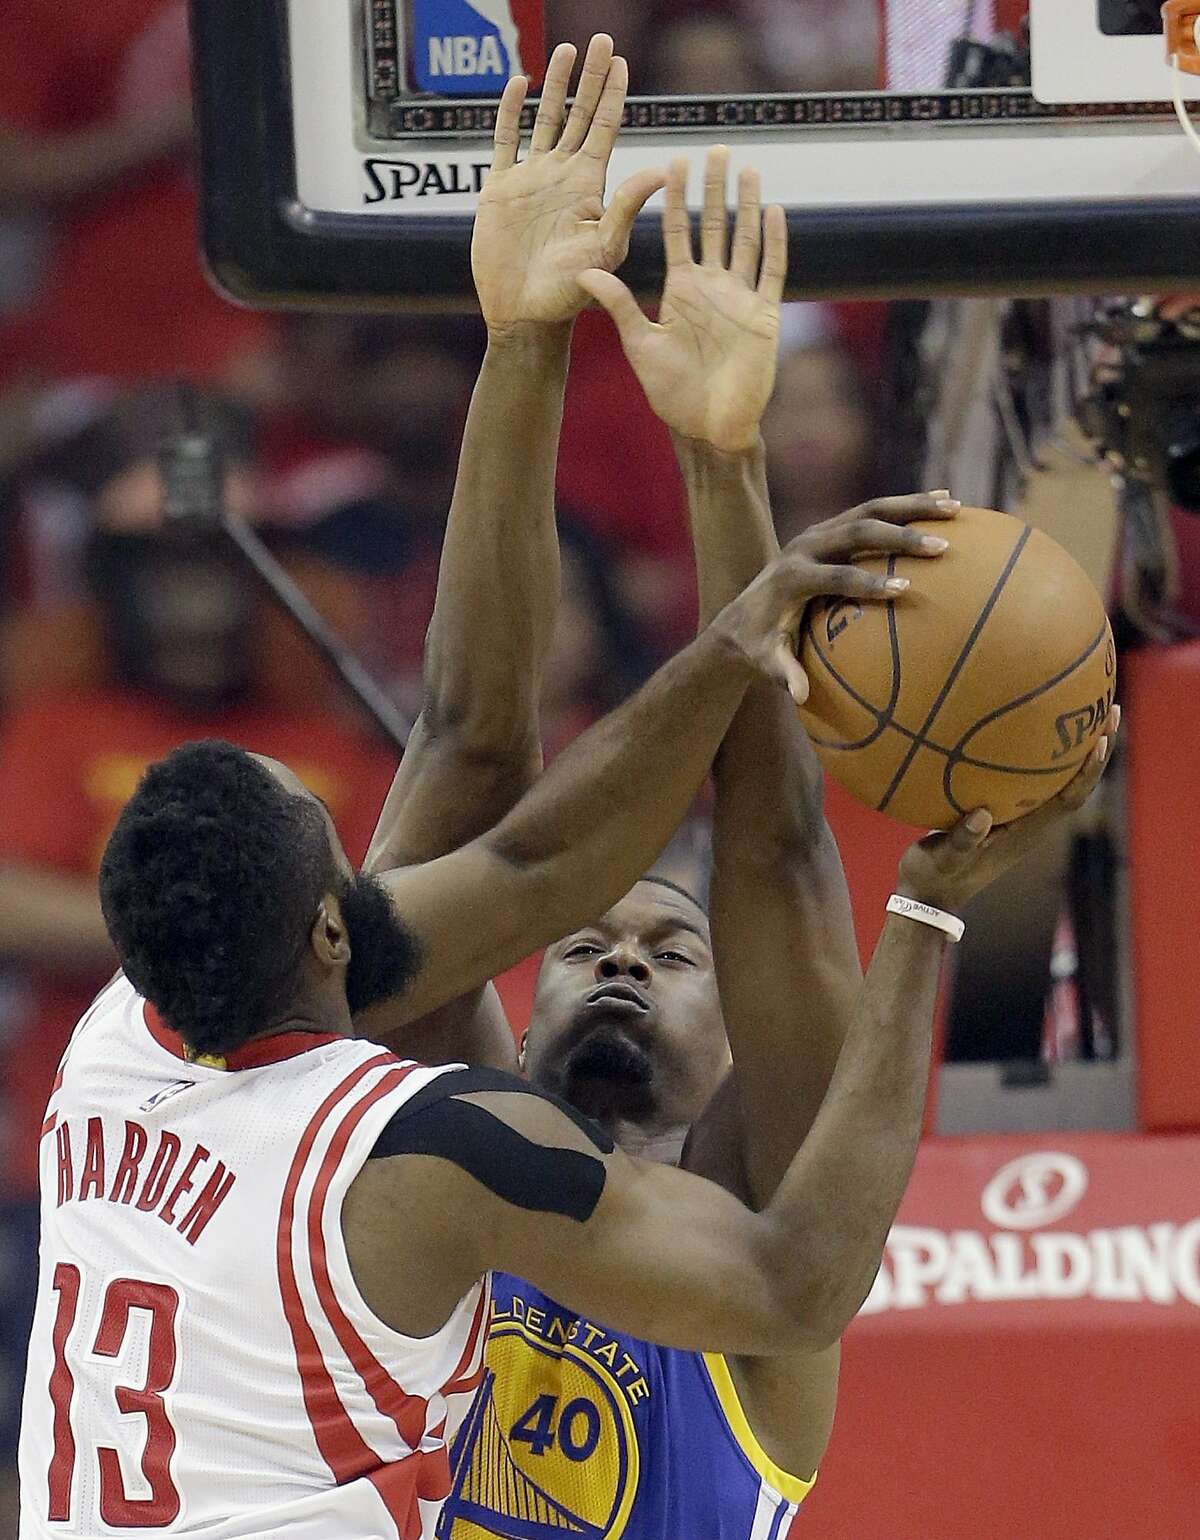 Houston Rockets guard James Harden (13) shoots as Golden State Warriors forward Harrison Barnes (40) defends during the first half in Game 4 of the NBA basketball Western Conference finals Monday, May 25, 2015, in Houston. (AP Photo/David J. Phillip)